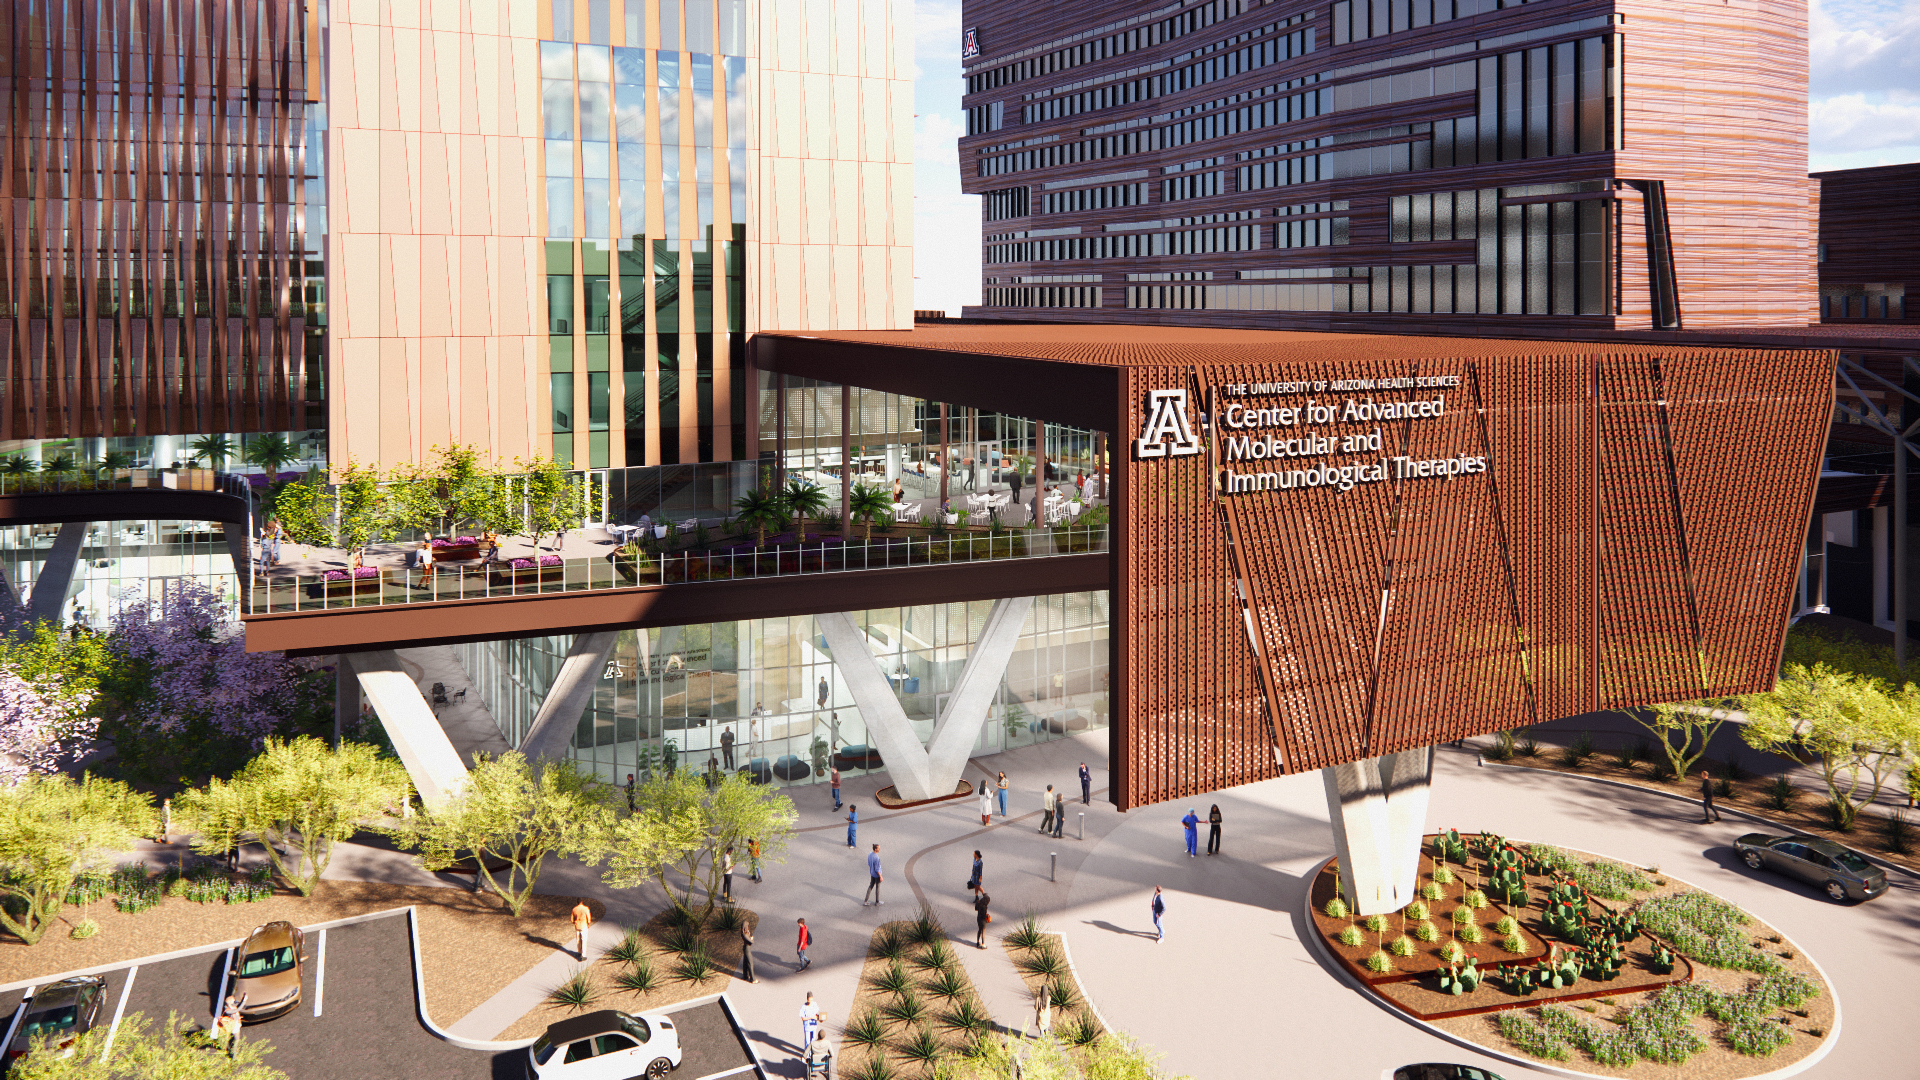 [Artist illustration of the Center for Advanced Molecular and Immunological Therapies]